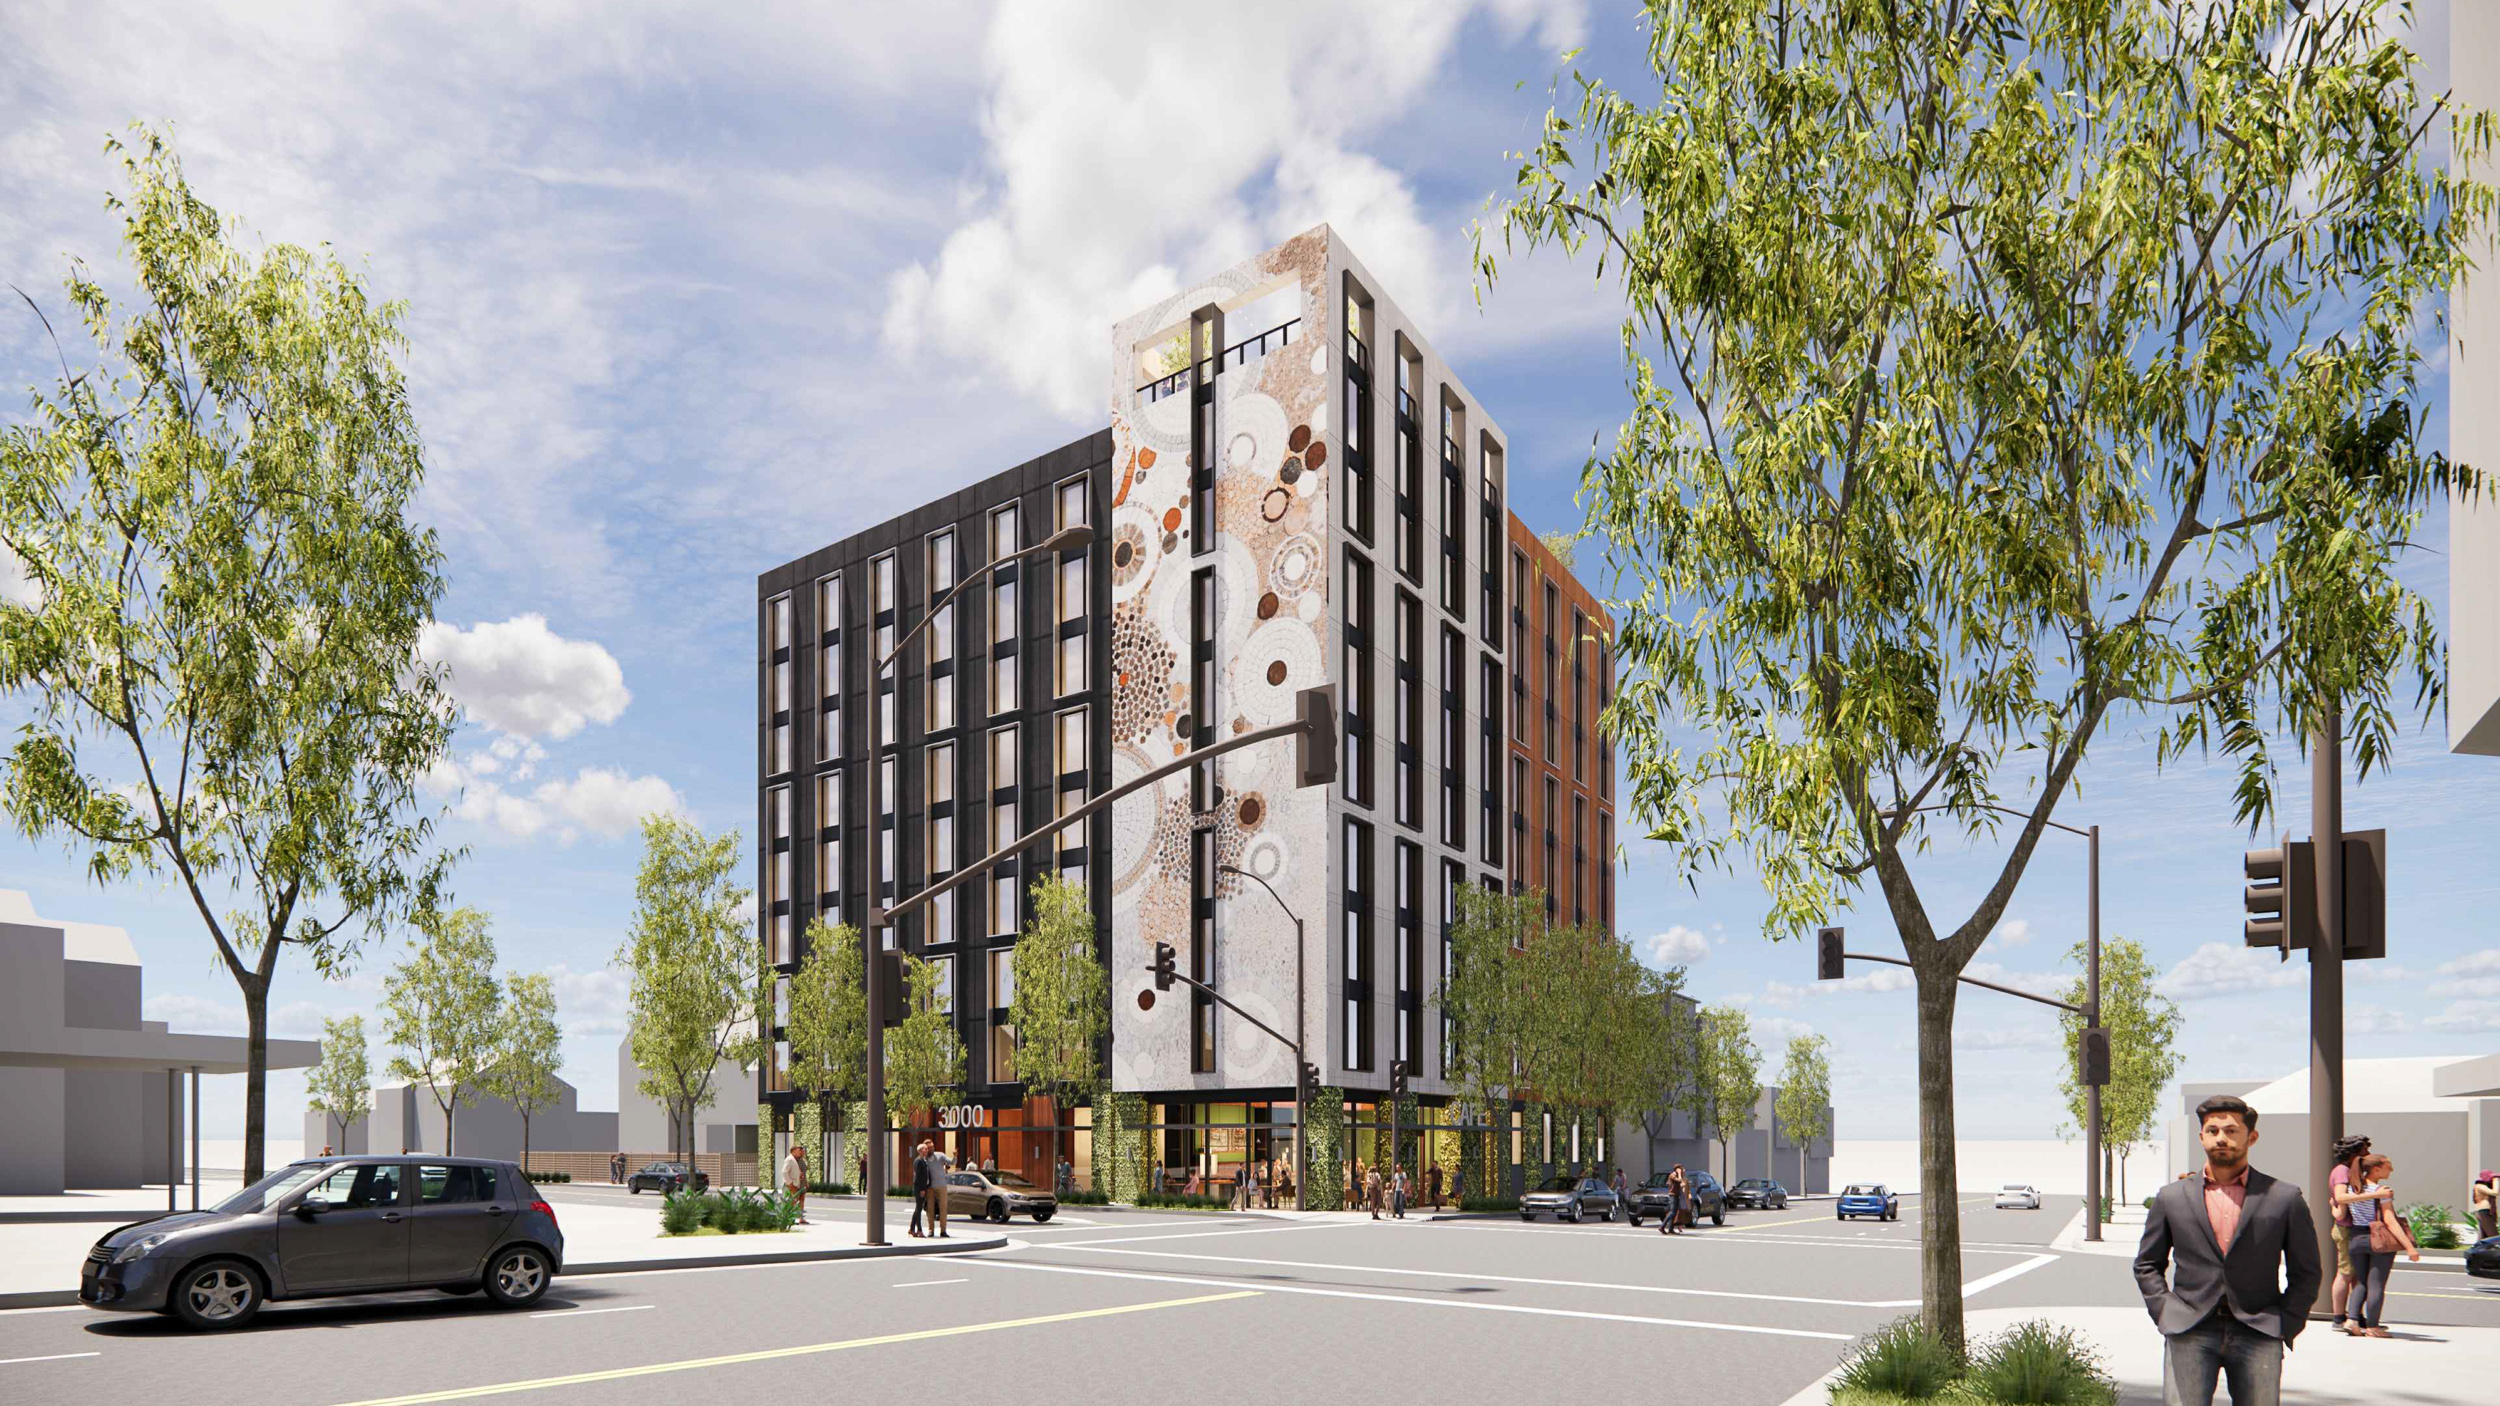 3000 Shattuck Avenue pedestrian view from Ashby, rendering by Trachtenberg Architects